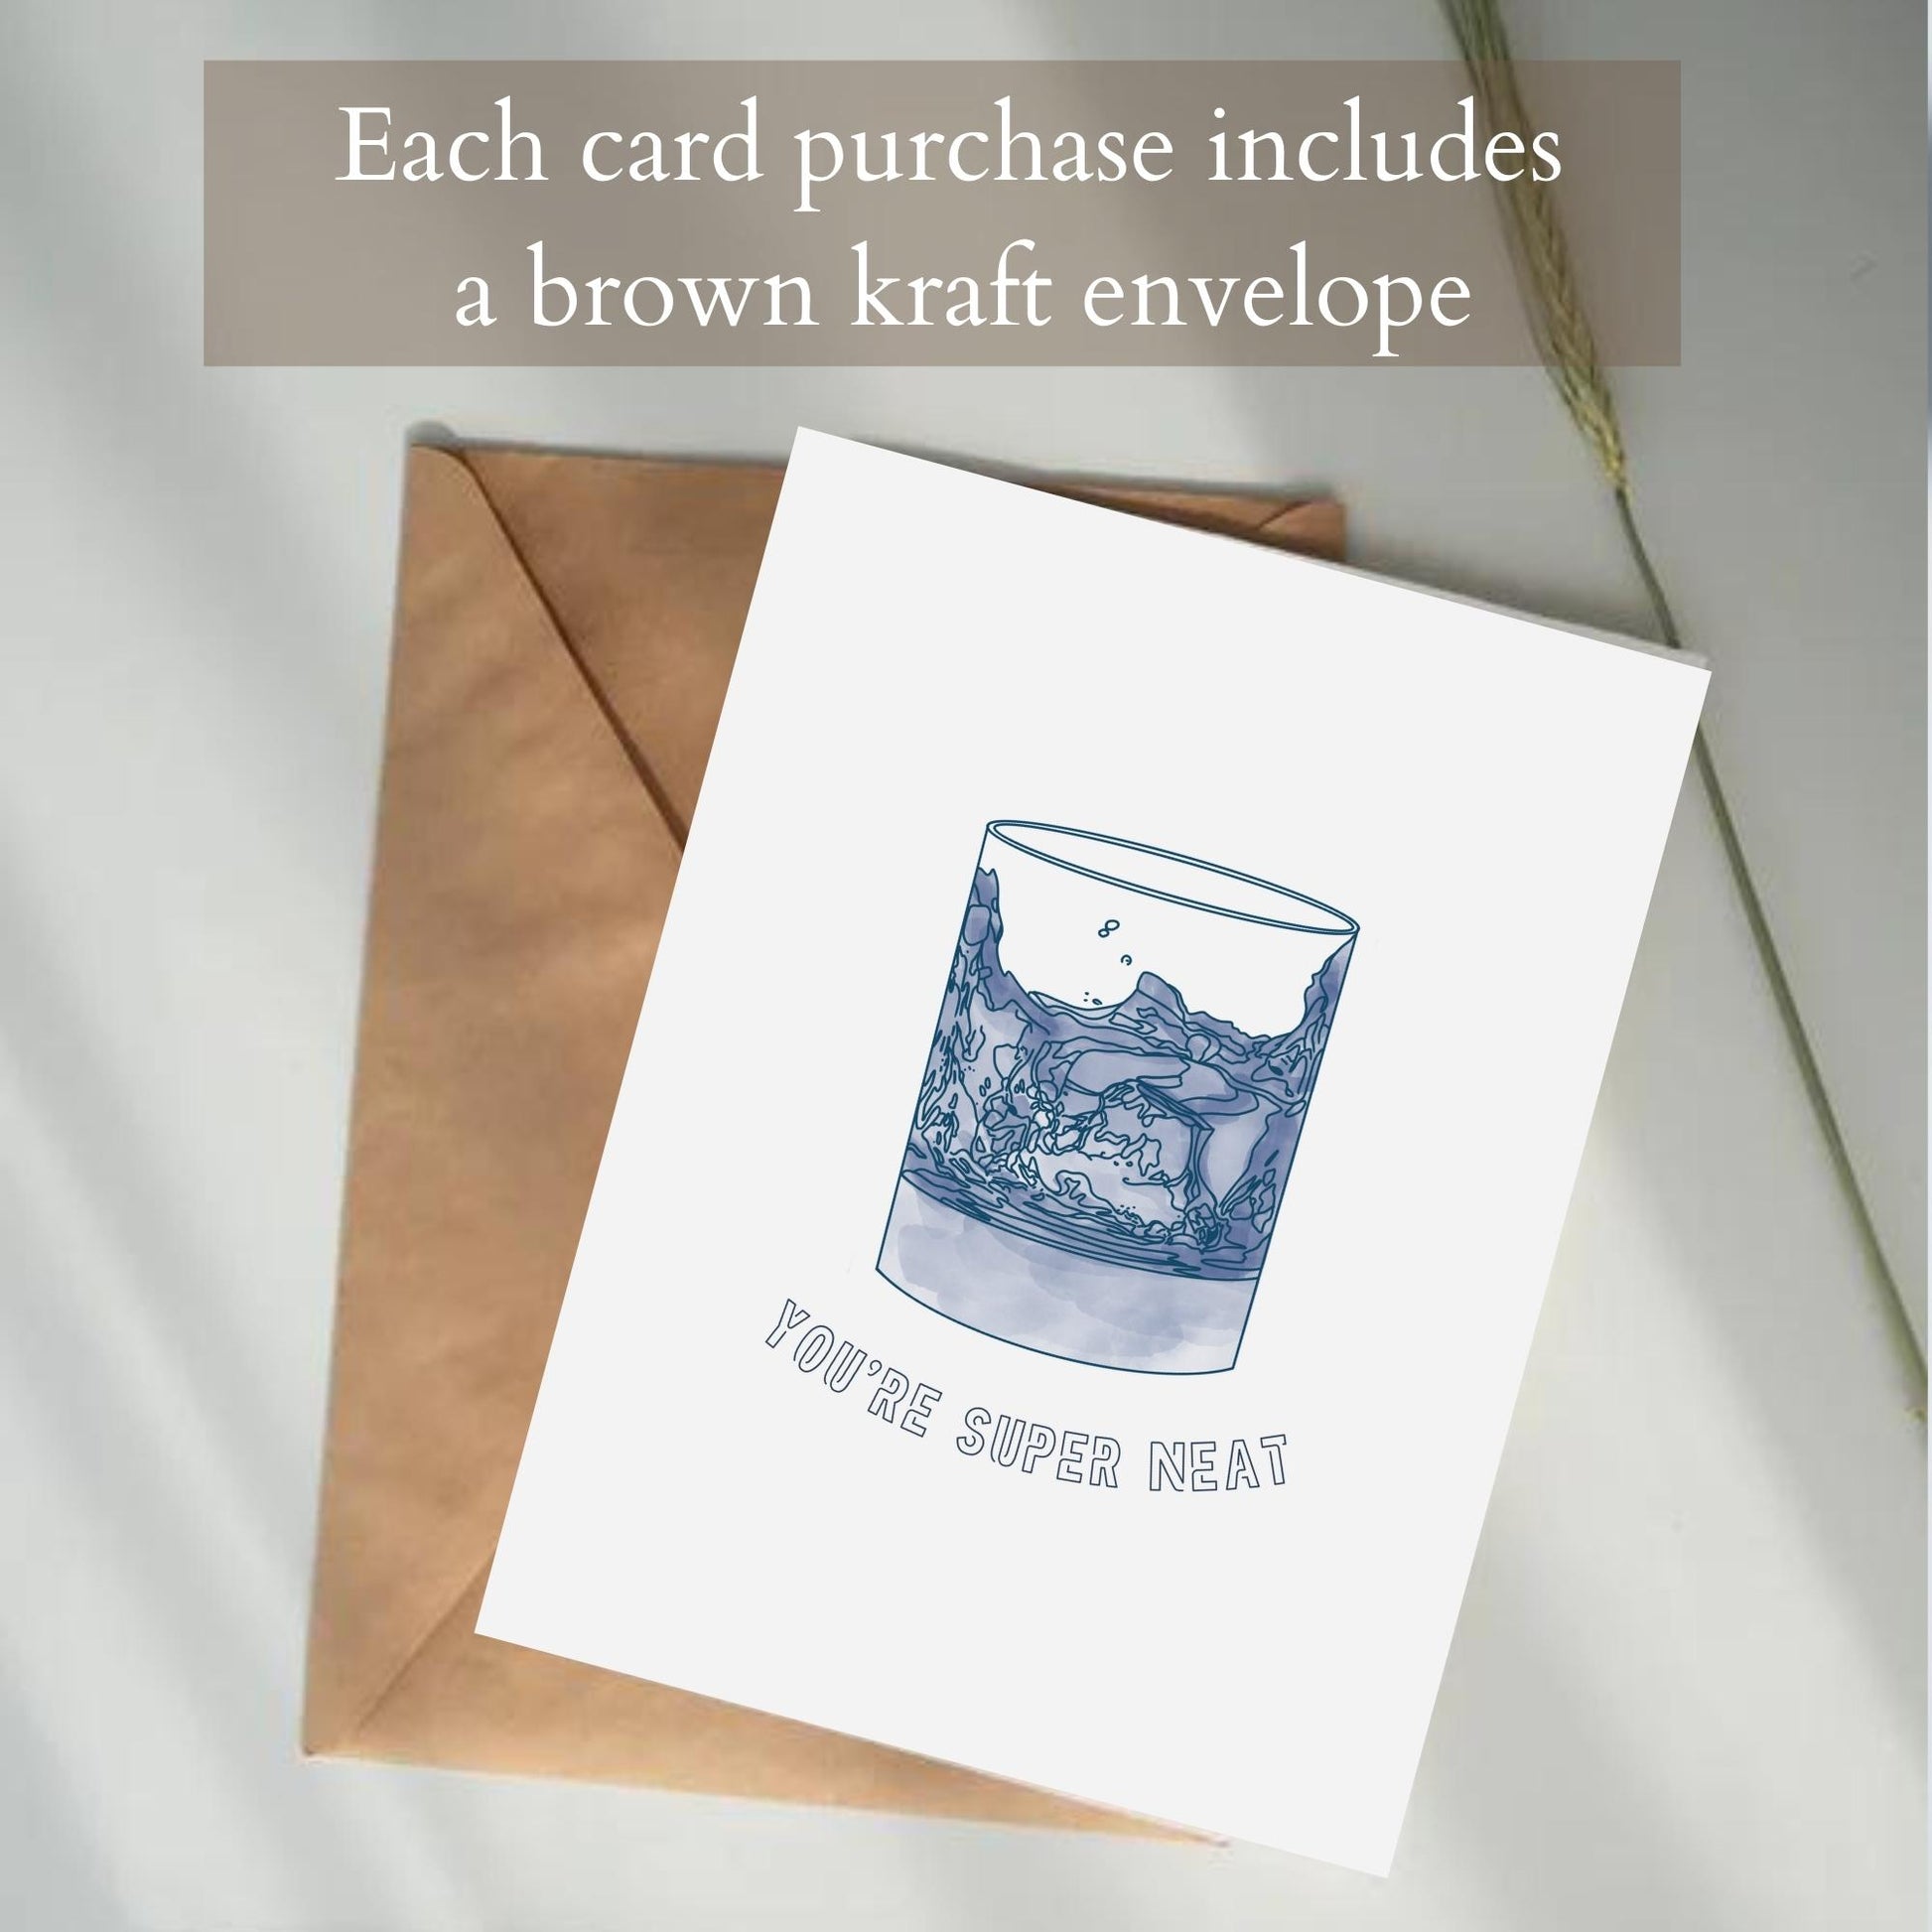 each purchase comes with a brown kraft envelope